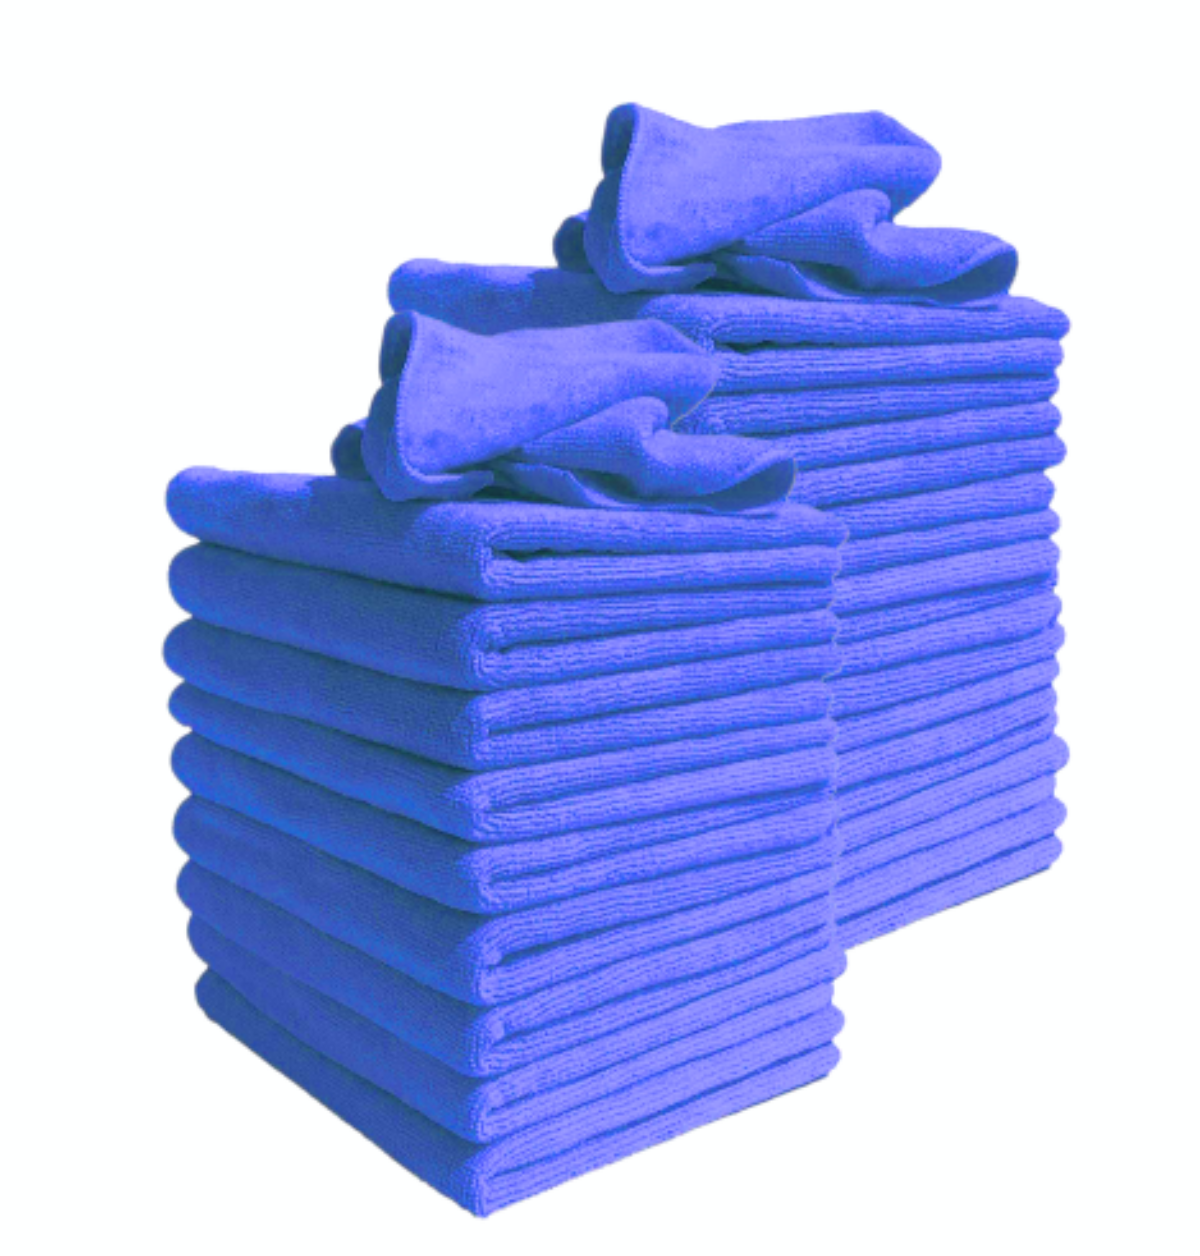 Microfibre Cleaning Cloths - Pack of 20, Large, Dark Blue, 40 x 40 cm